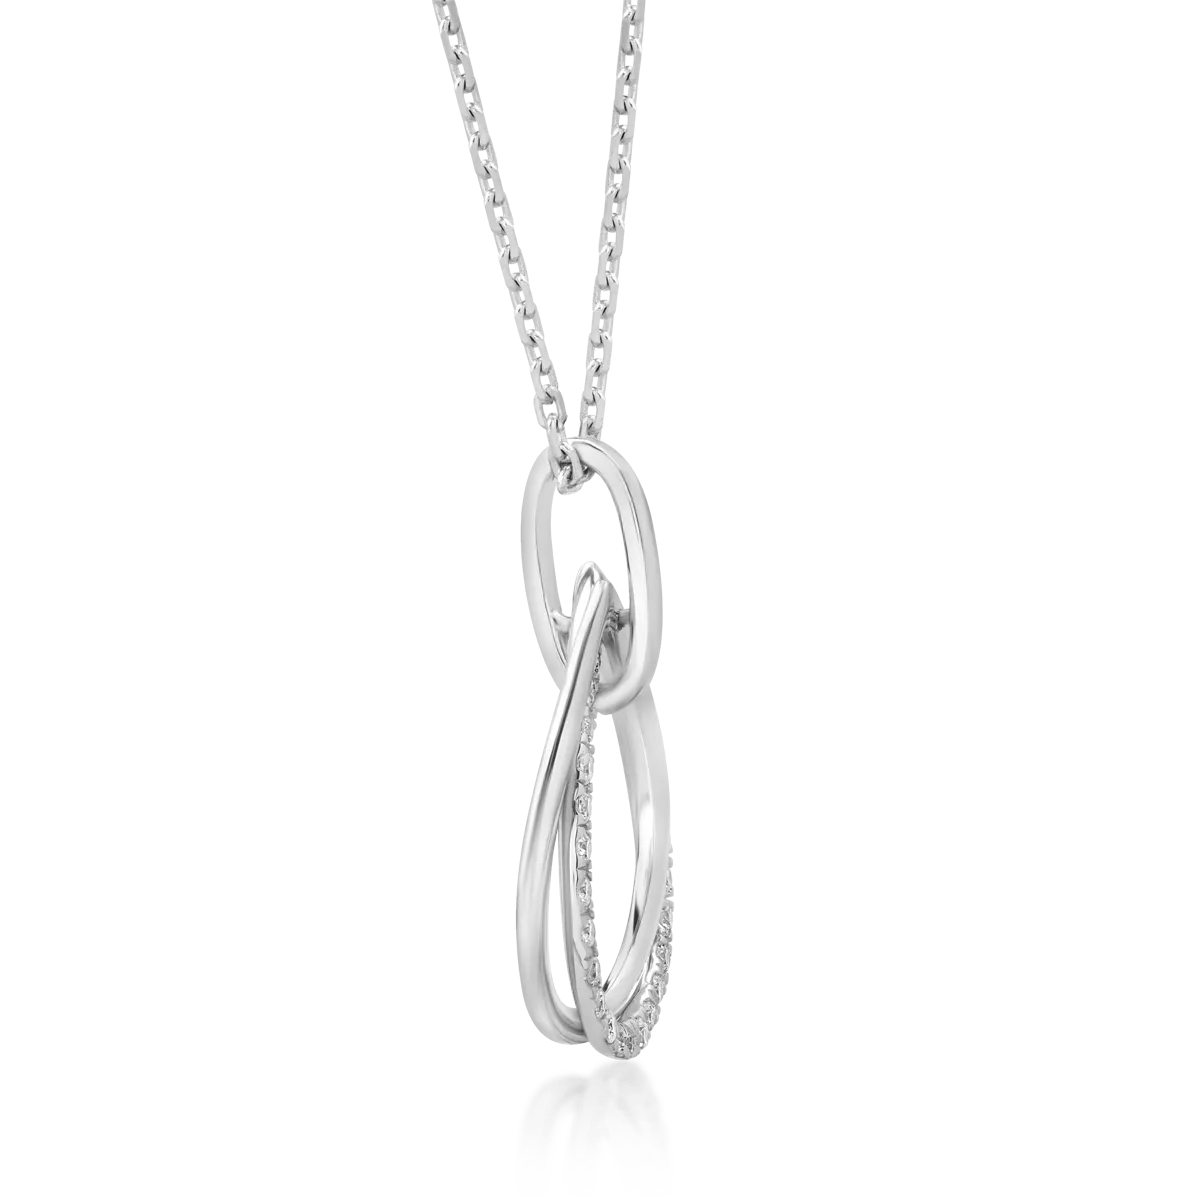 18K white gold chain with pendant with diamonds of 0.12ct